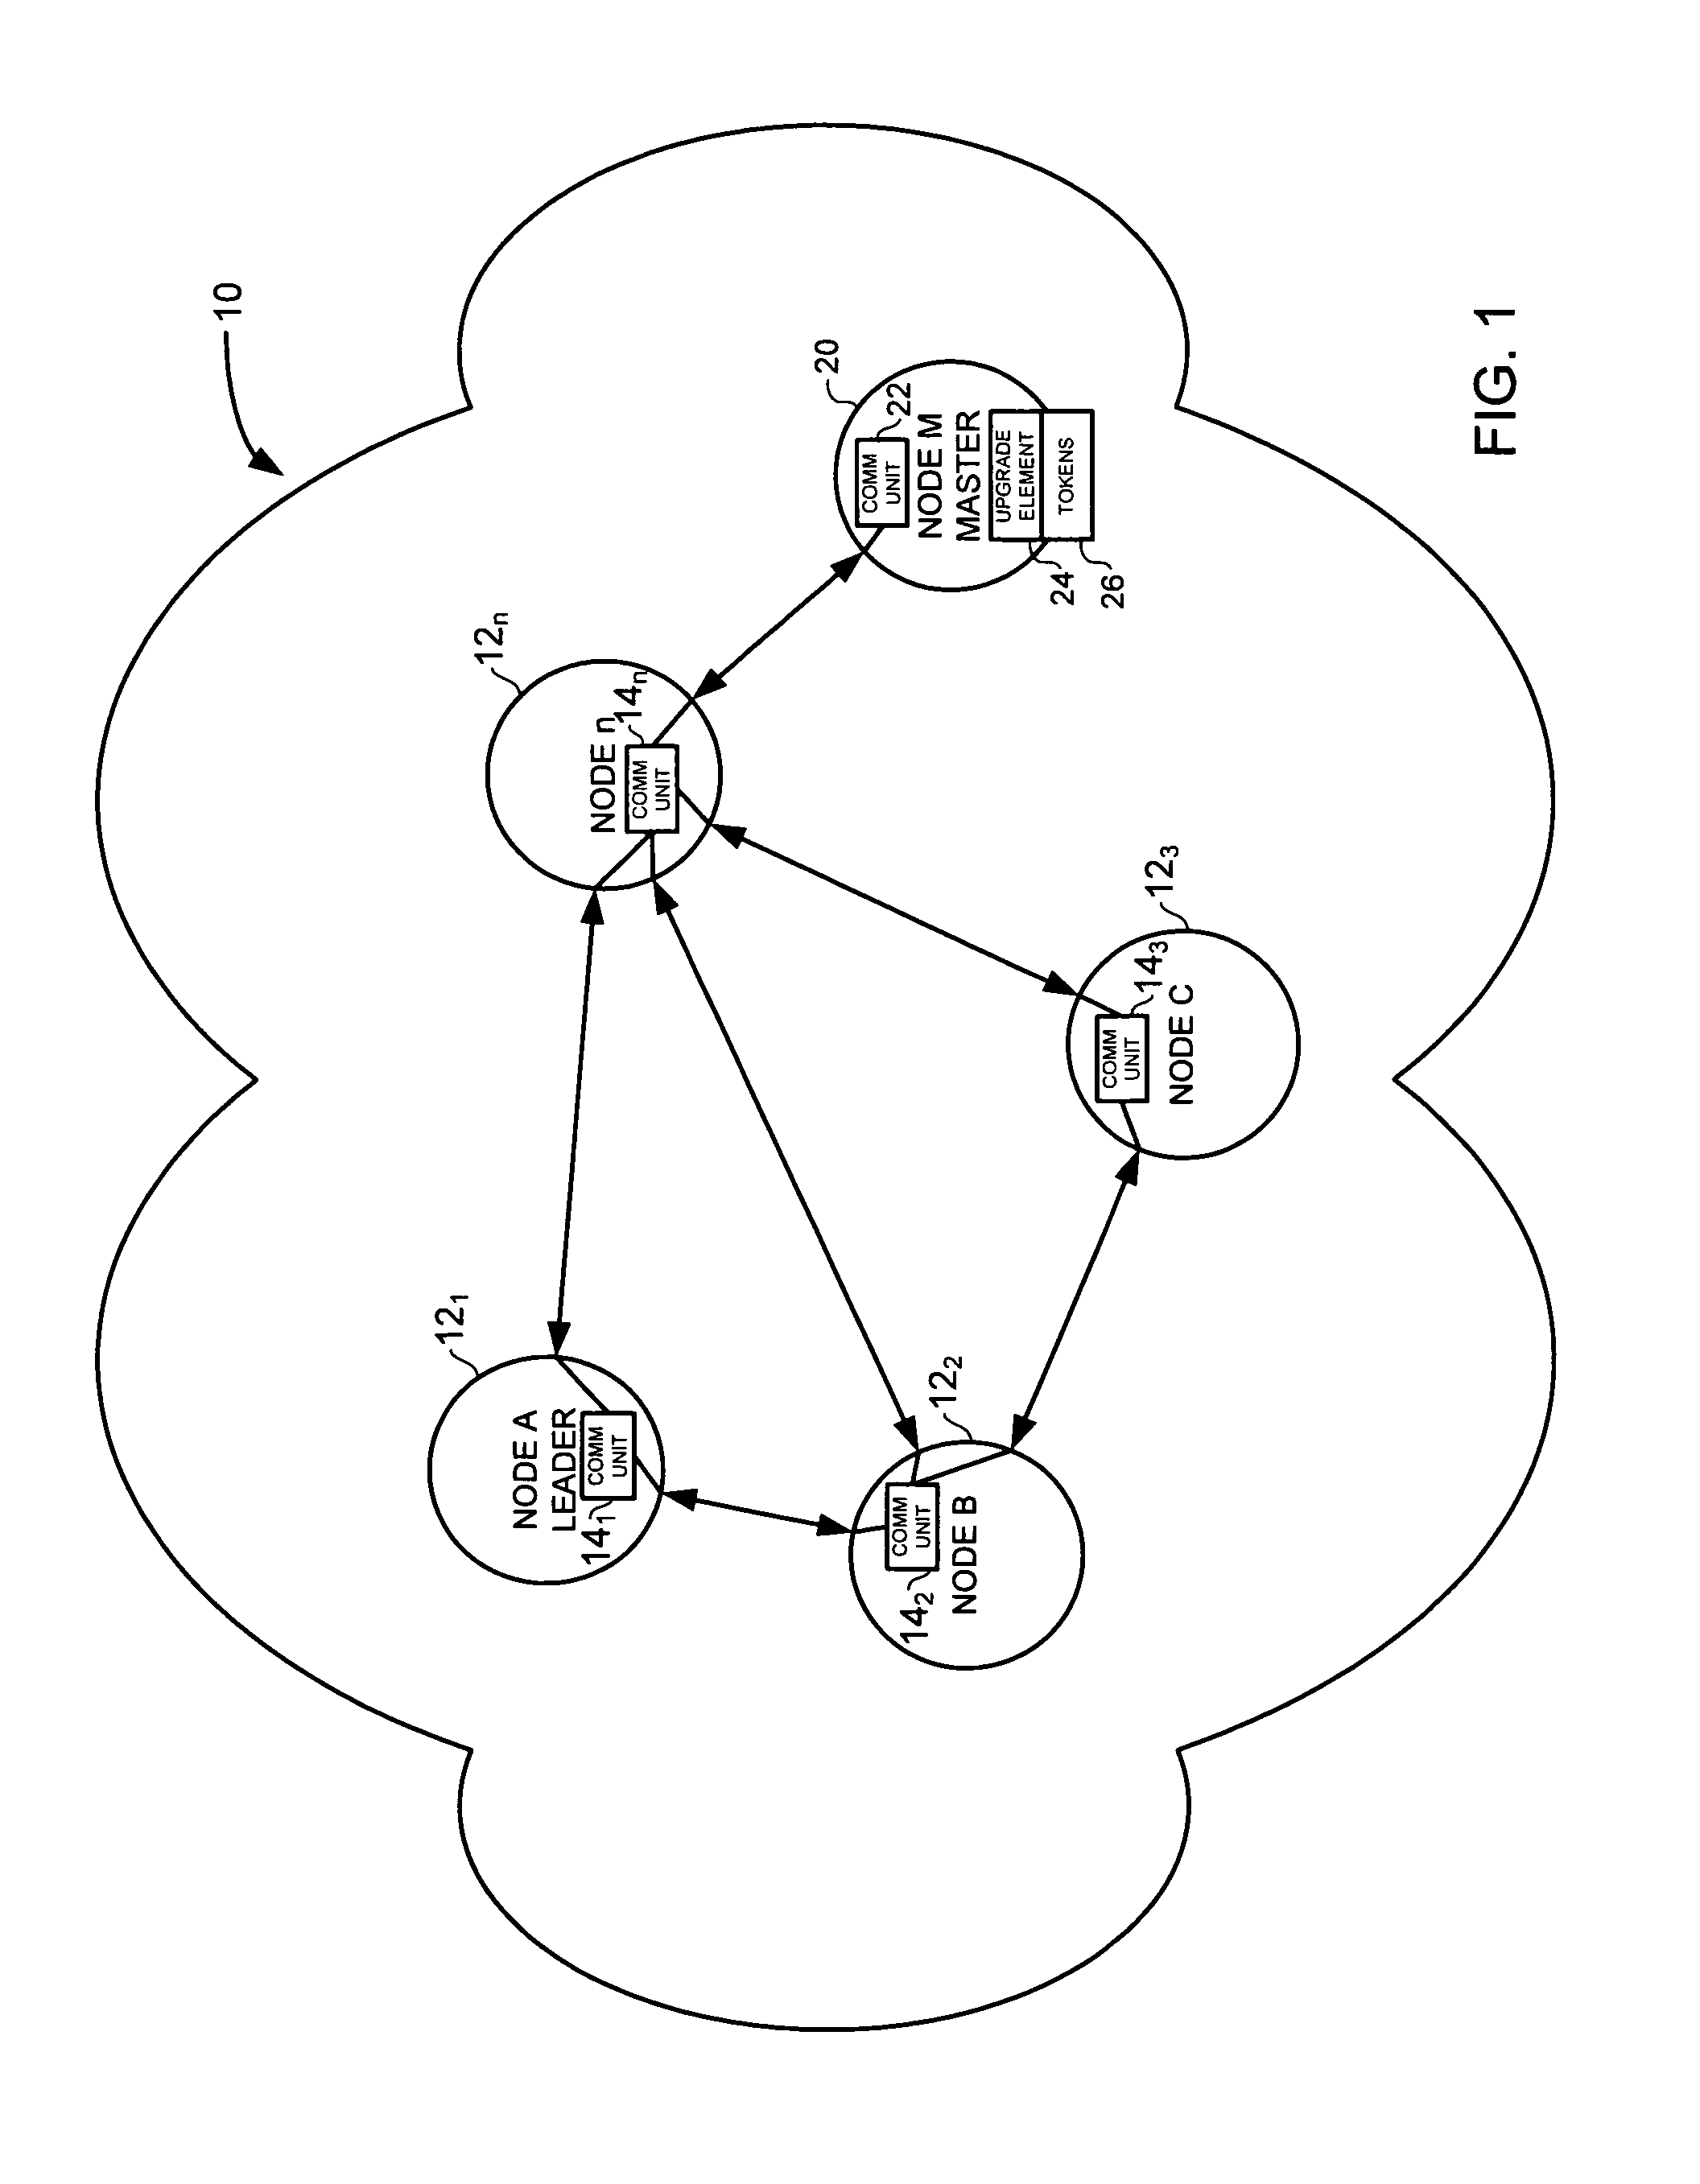 Method and system for distributing an upgrade among nodes in a network